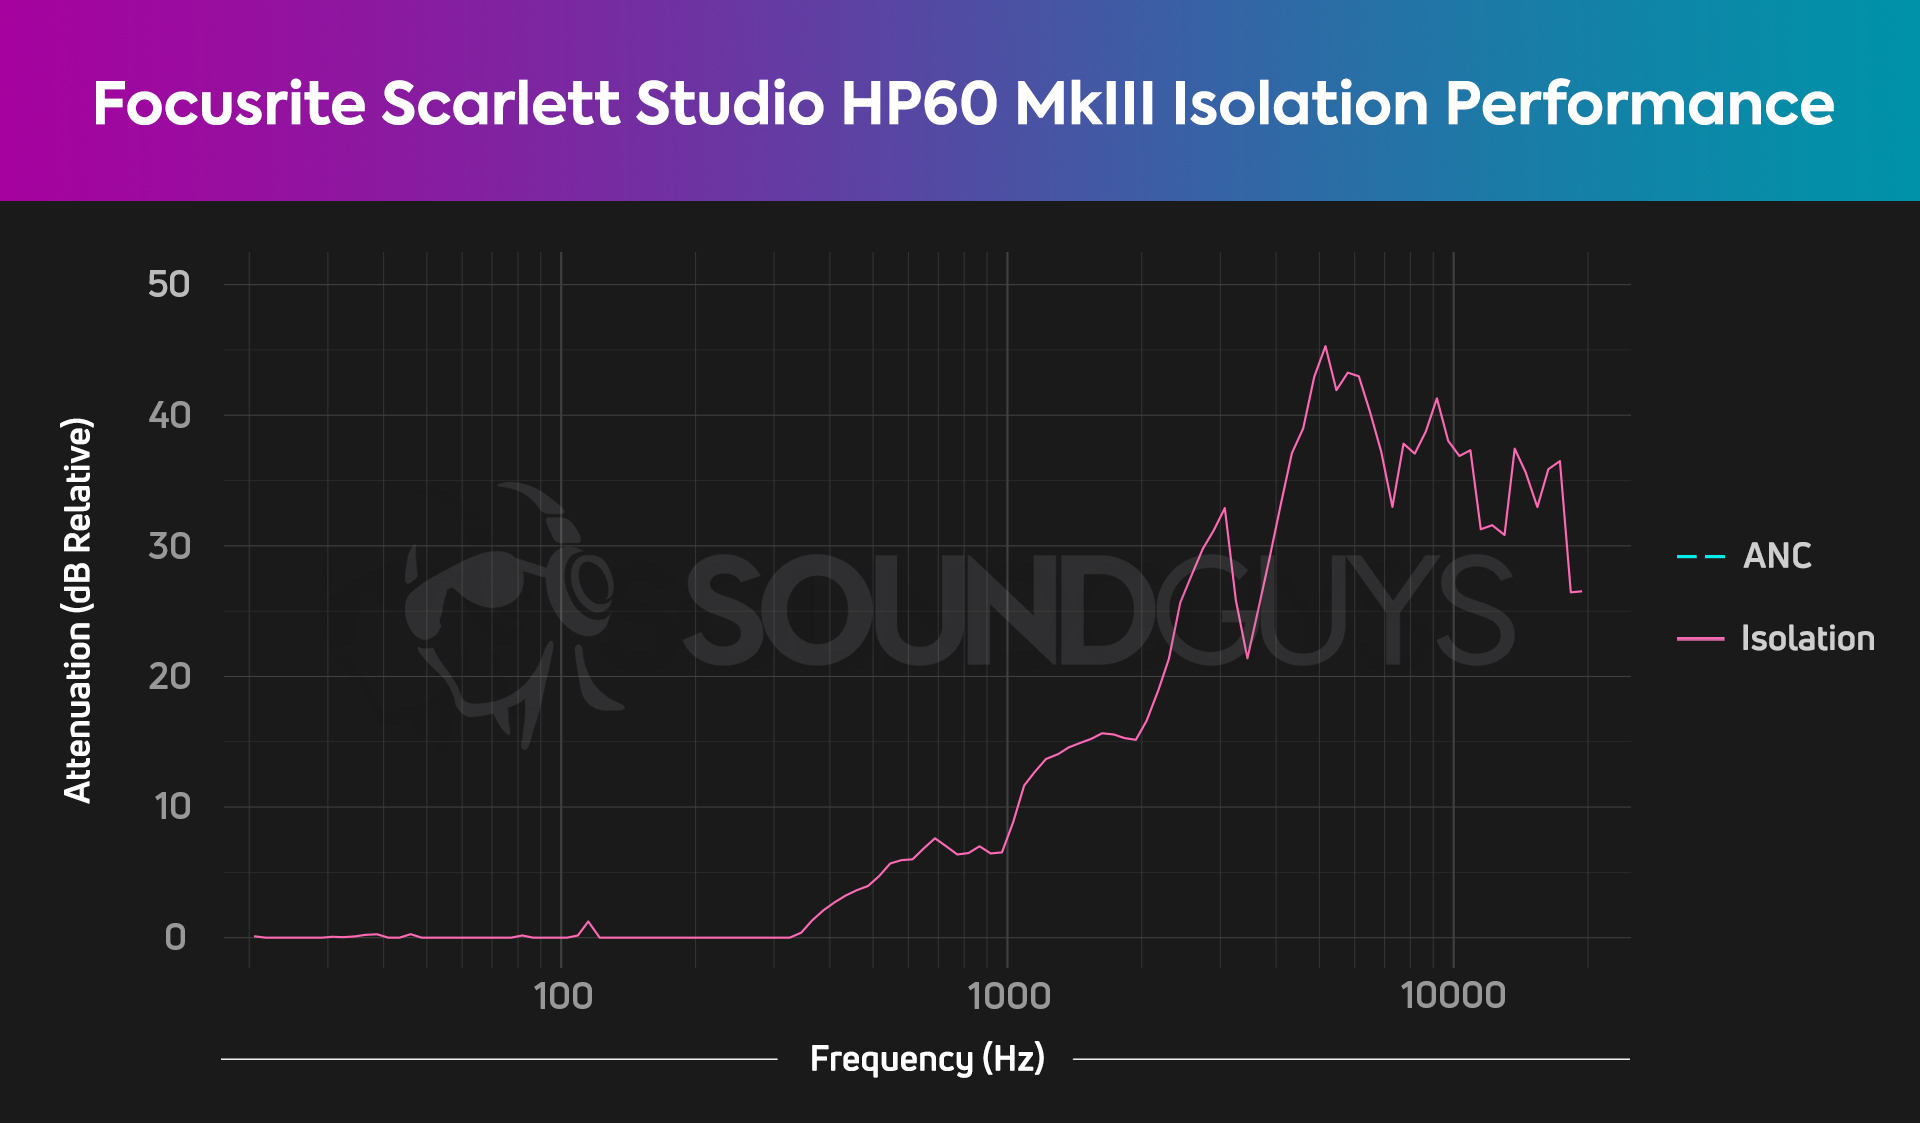 The Focusrite HP60 MkIII isolation chart, showing mediocre passive isolation performance.